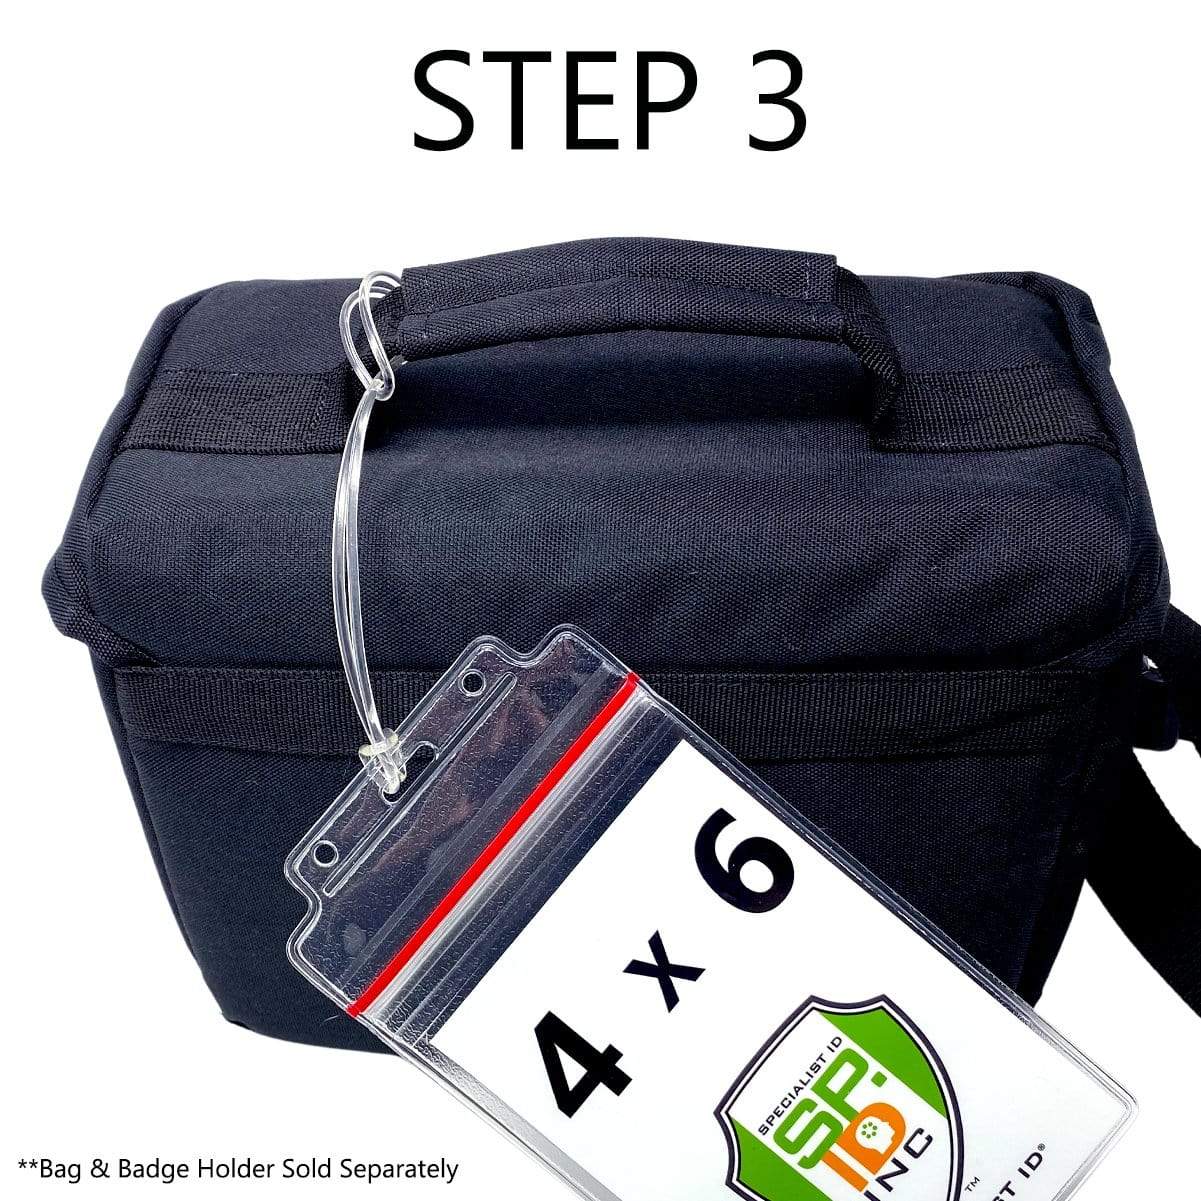 A black bag with a plastic badge holder and durable flexible strap attached to it. The badge displays "4 x 6" and a logo. "STEP 3" is written above the bag, while "*Extra Long 9" Luggage Tag Loops - Clear Worm Loops for Luggage Tags (2410-2100) Sold Separately" is noted below.